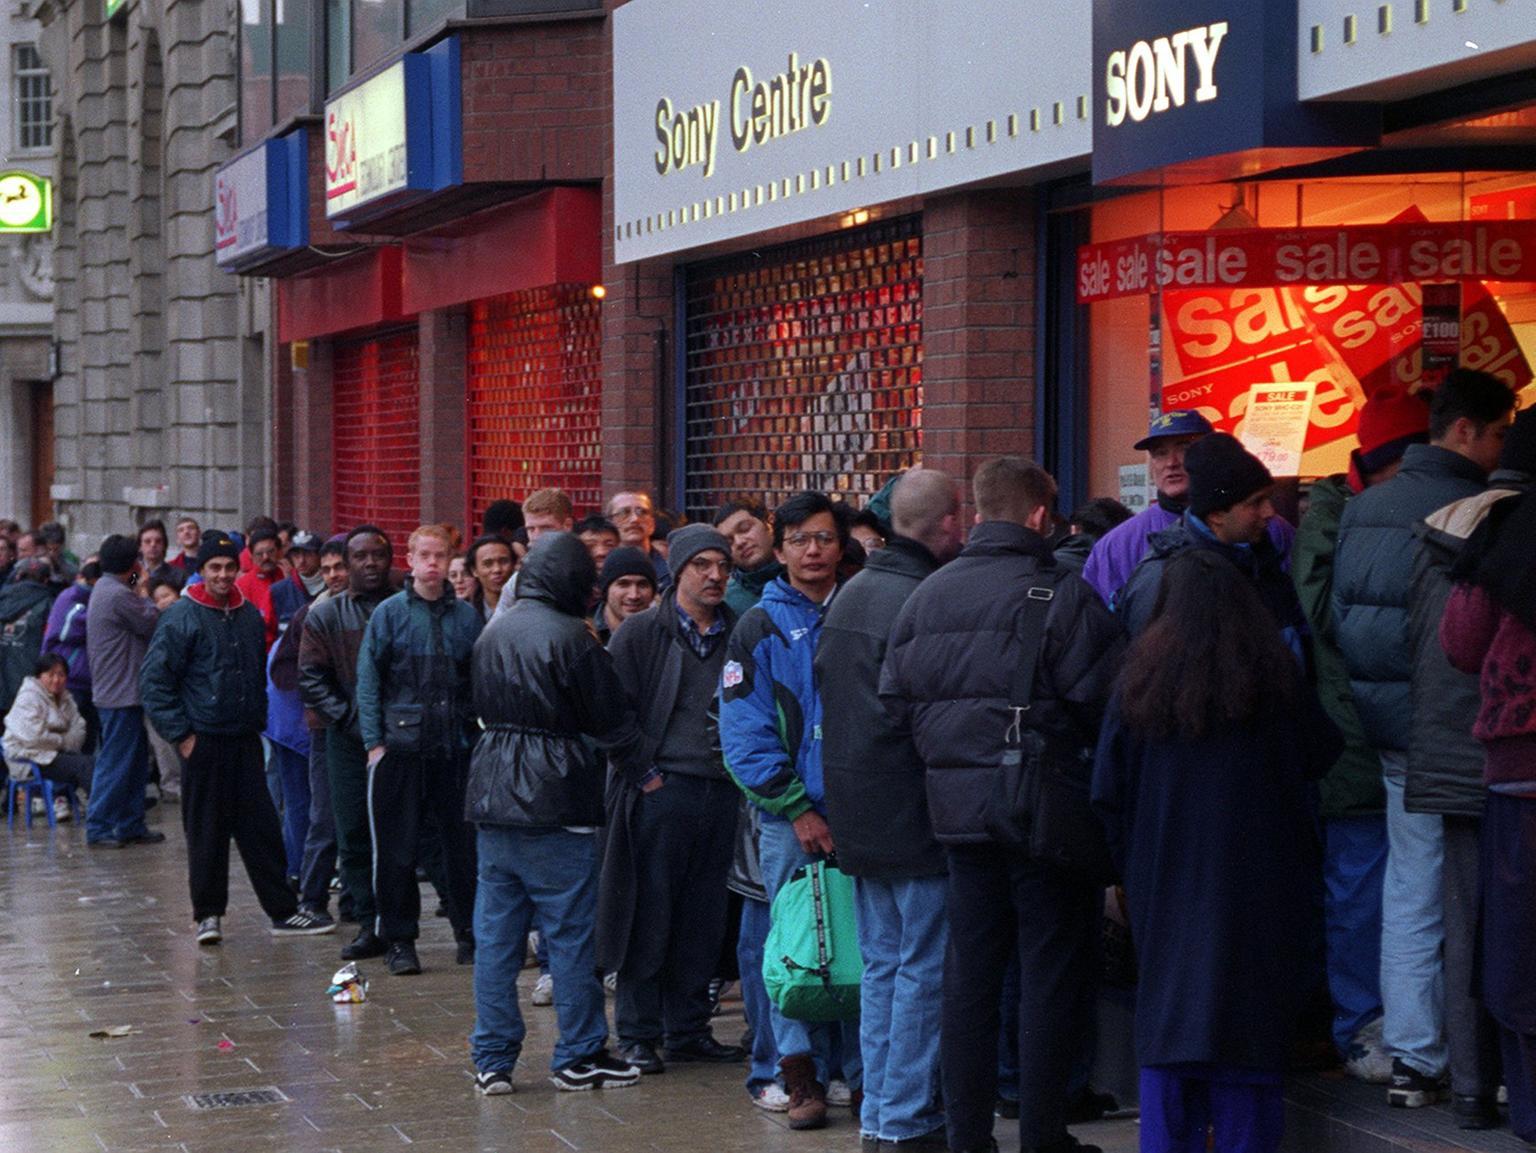 This was the queue outside Leeds Sony Centre on Vicar Lane on Boxing Day morning. One family had been waiting since Christmas Eve afternoon.